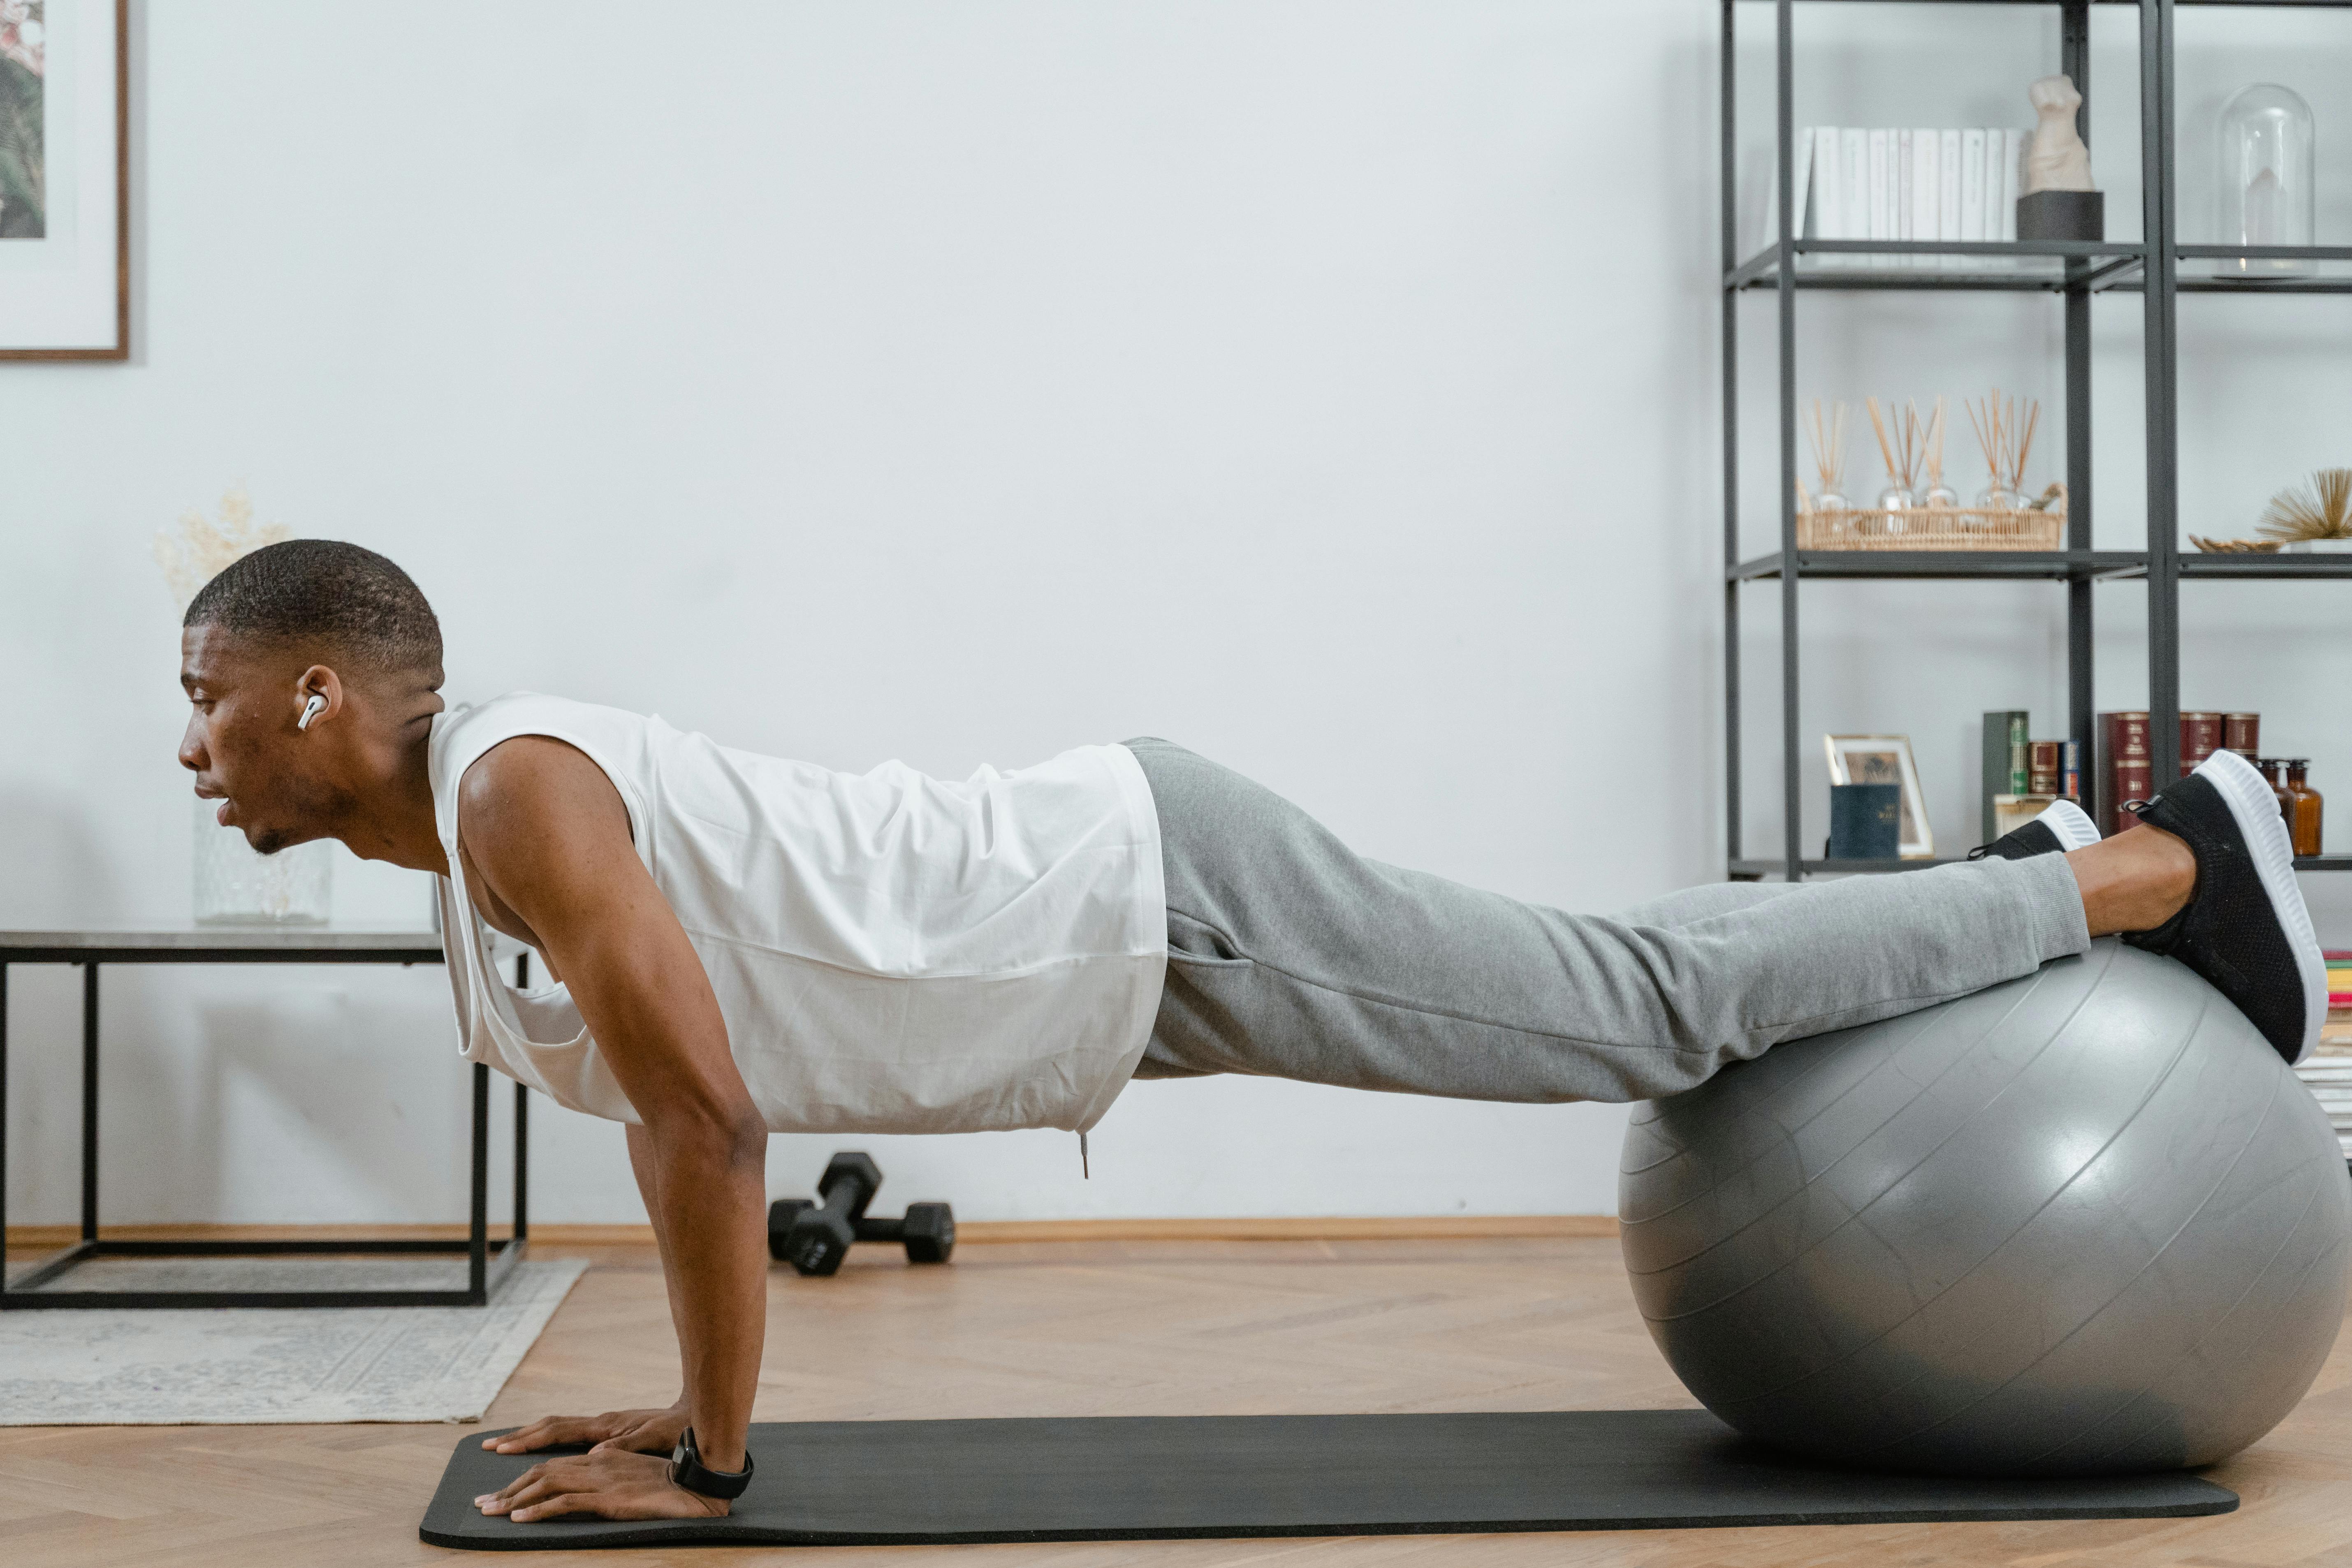 A Man Exercising by Using a Yoga Ball · Free Stock Photo